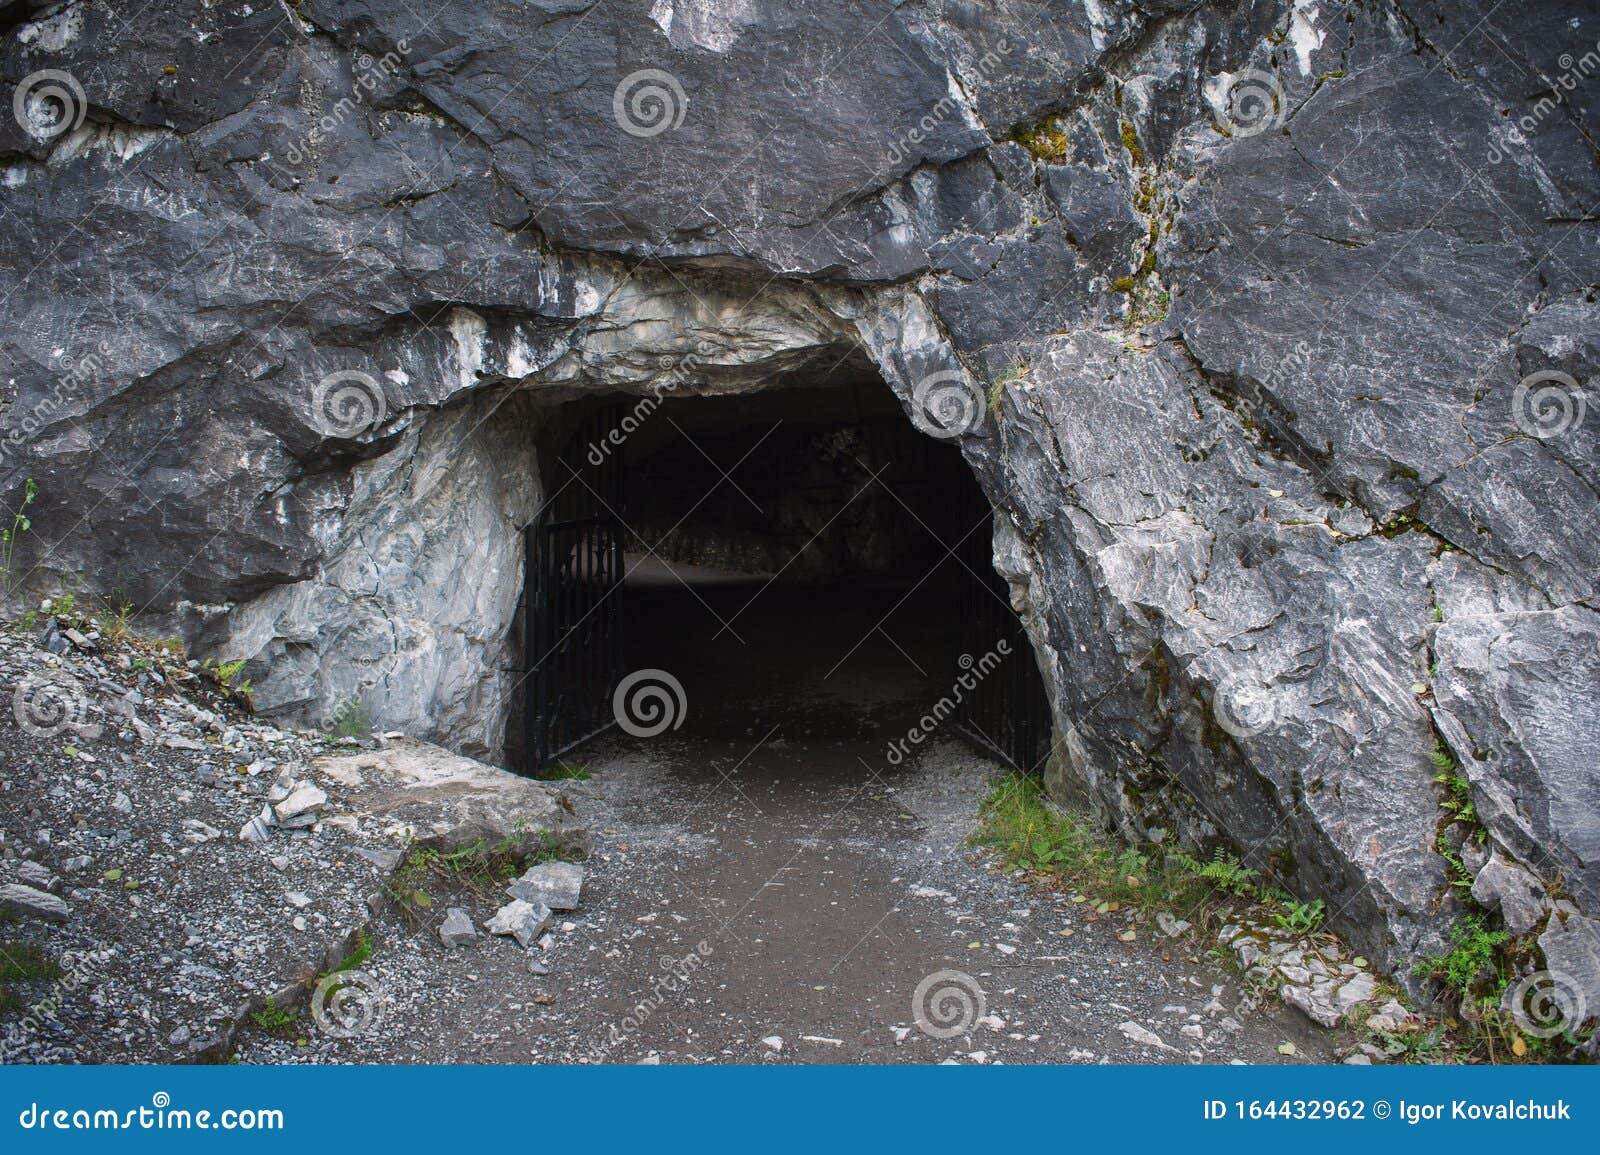 entrance to dark cave